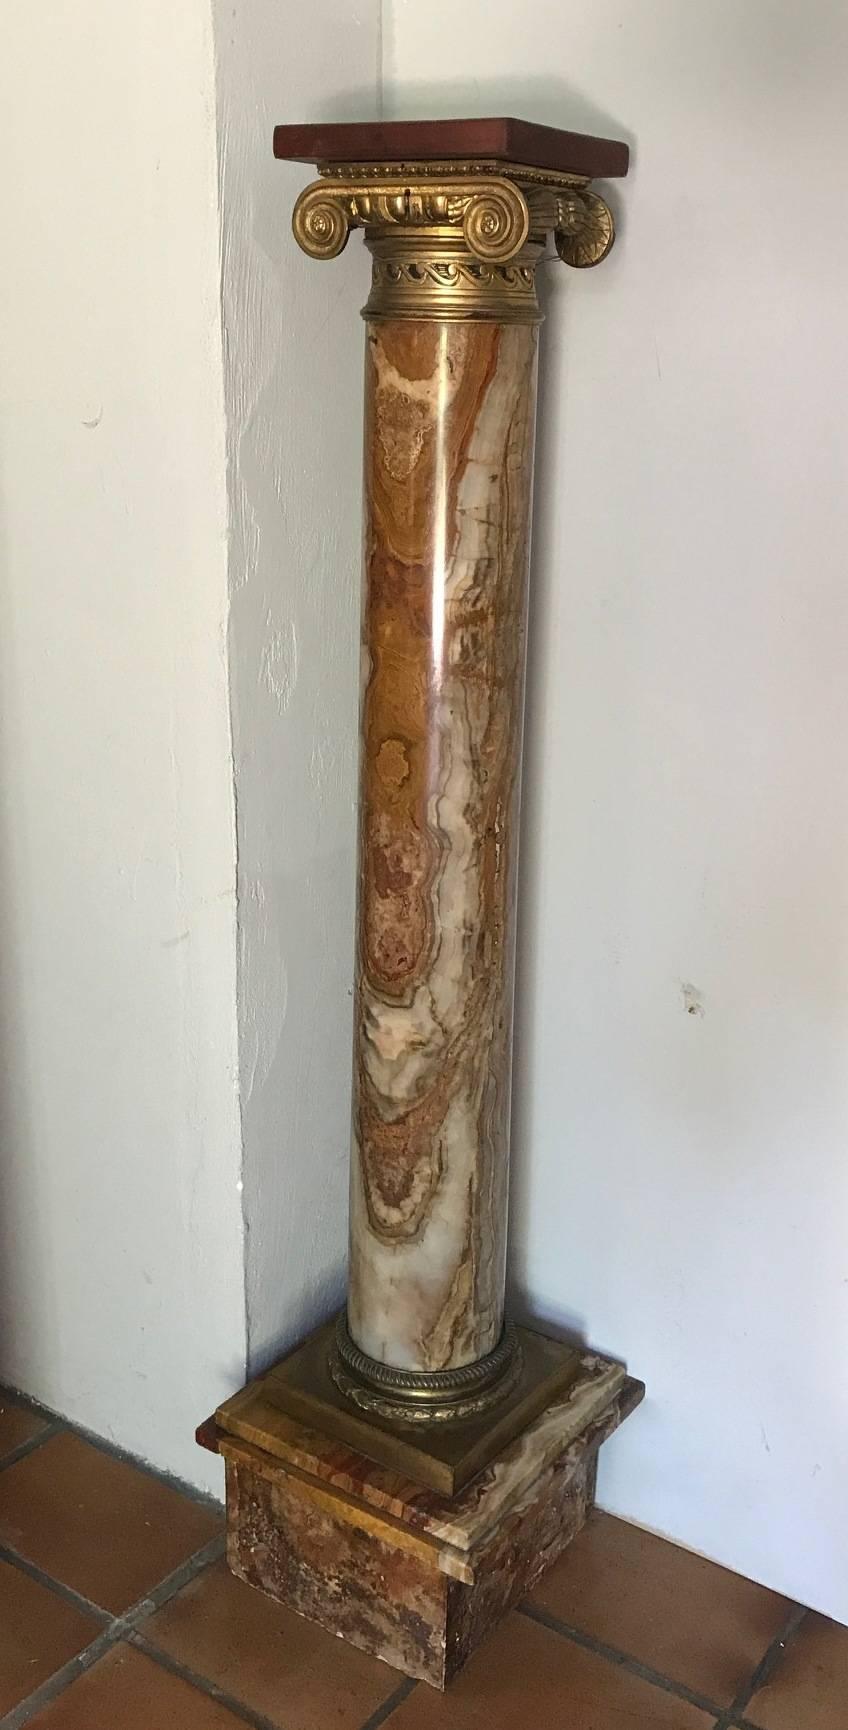 A beautiful breccia rouge royale marble and ormolu-mounted ionic pedestal column. Replaced wooden plinth.